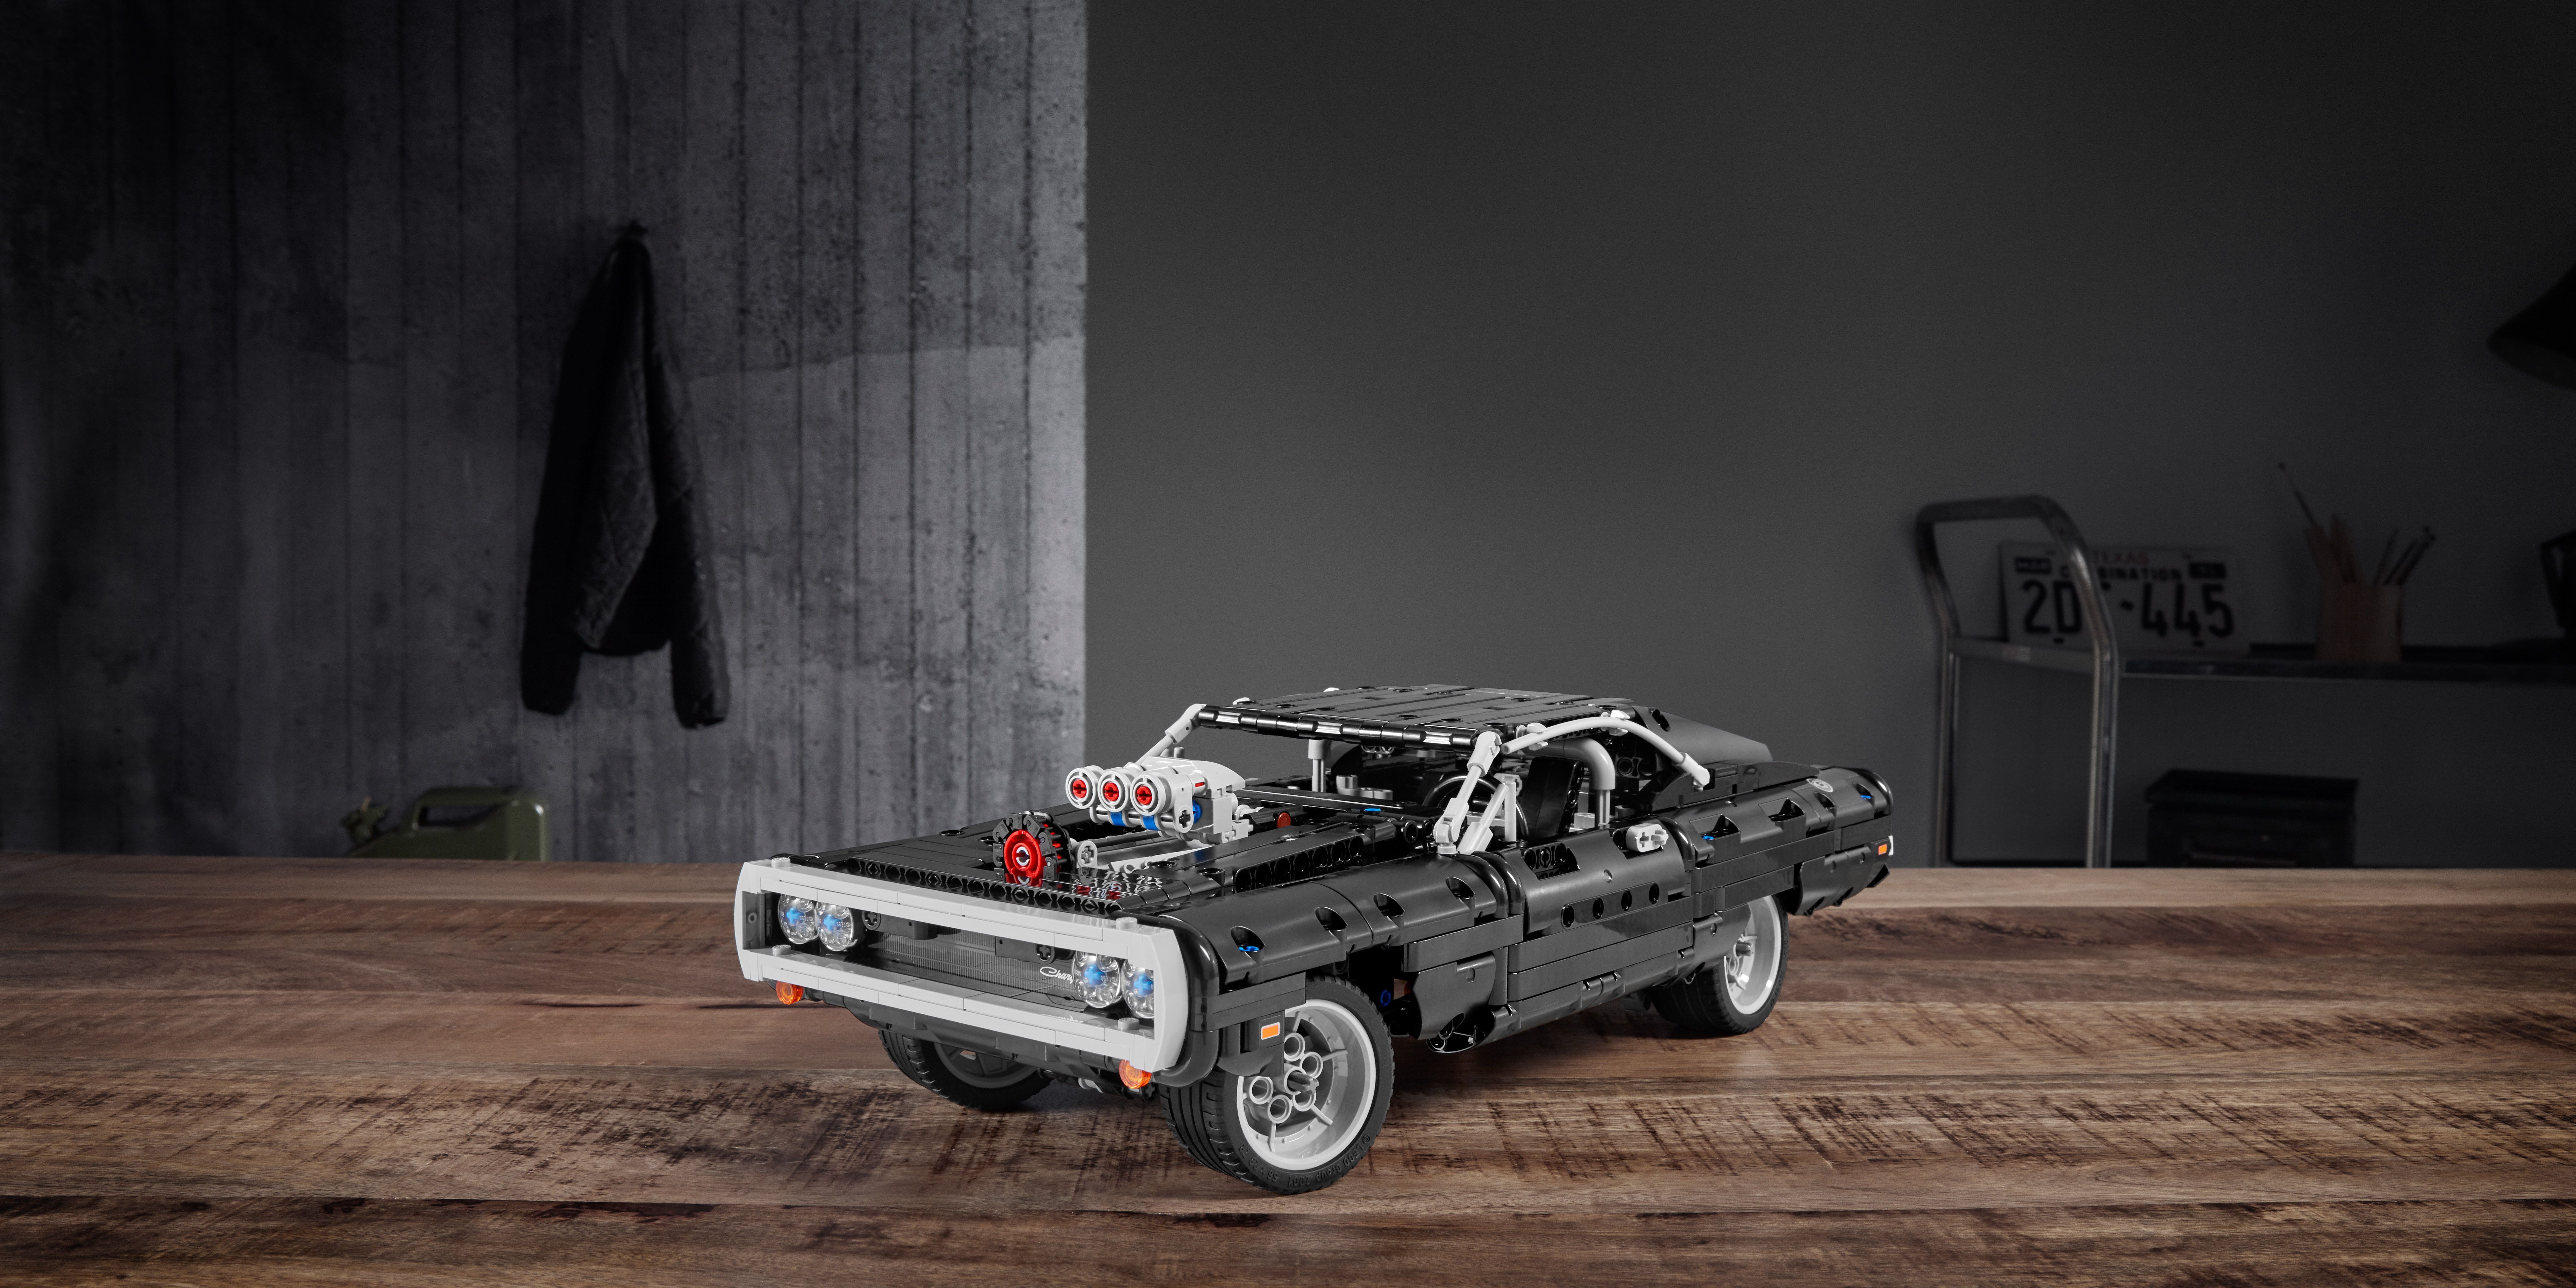 Dominic Toretto S Fast And Furious Dodge Charger Becomes Lego Kit